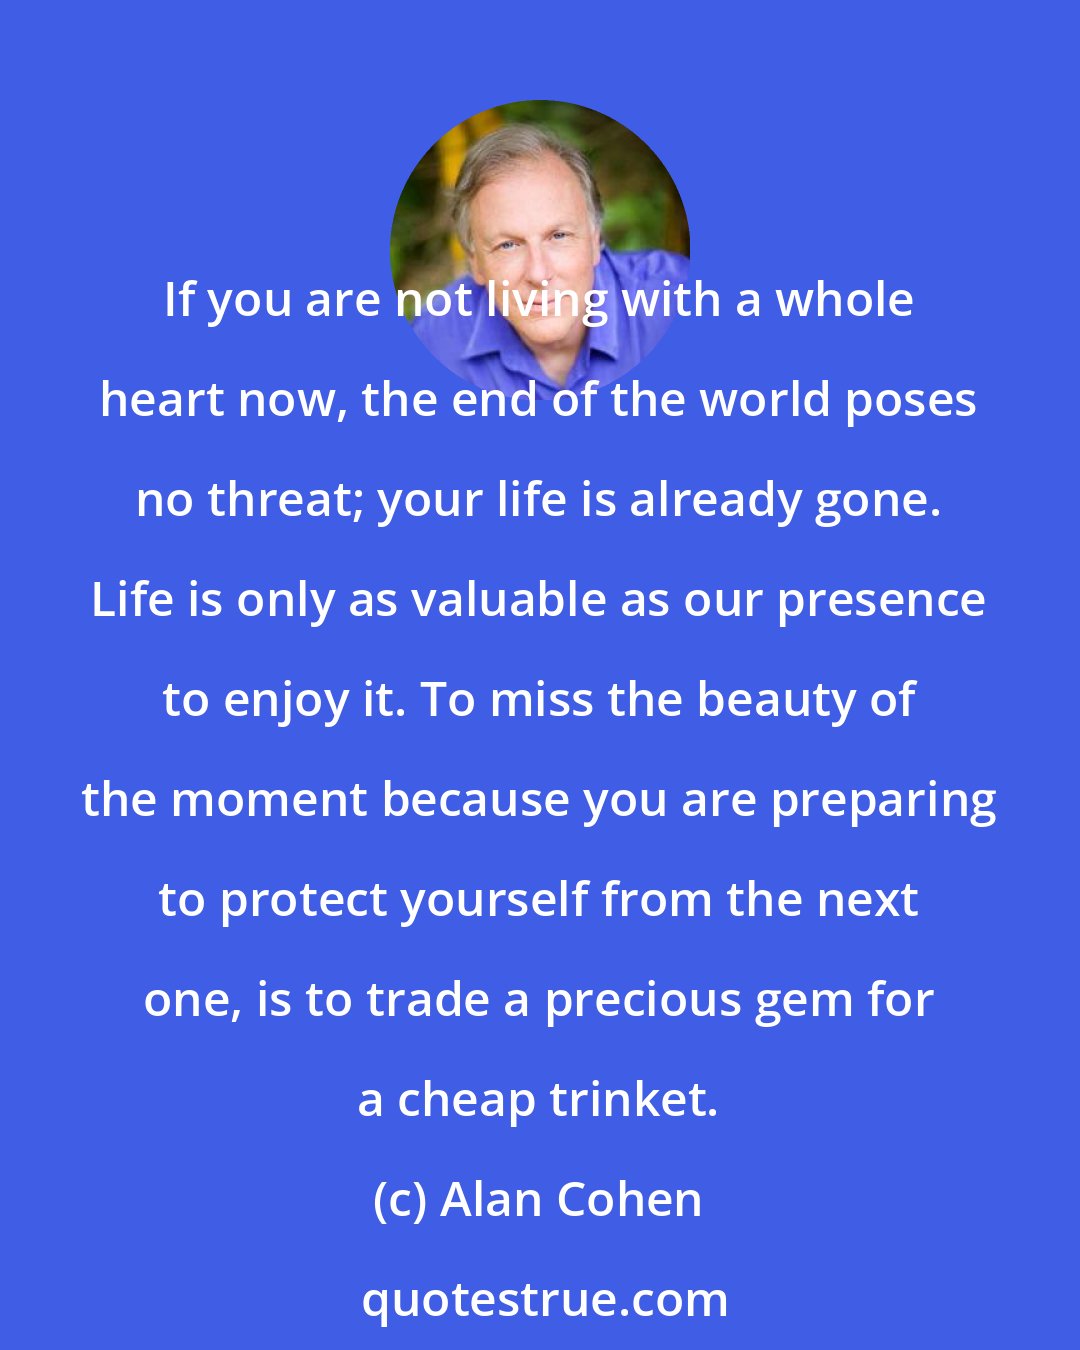 Alan Cohen: If you are not living with a whole heart now, the end of the world poses no threat; your life is already gone. Life is only as valuable as our presence to enjoy it. To miss the beauty of the moment because you are preparing to protect yourself from the next one, is to trade a precious gem for a cheap trinket.